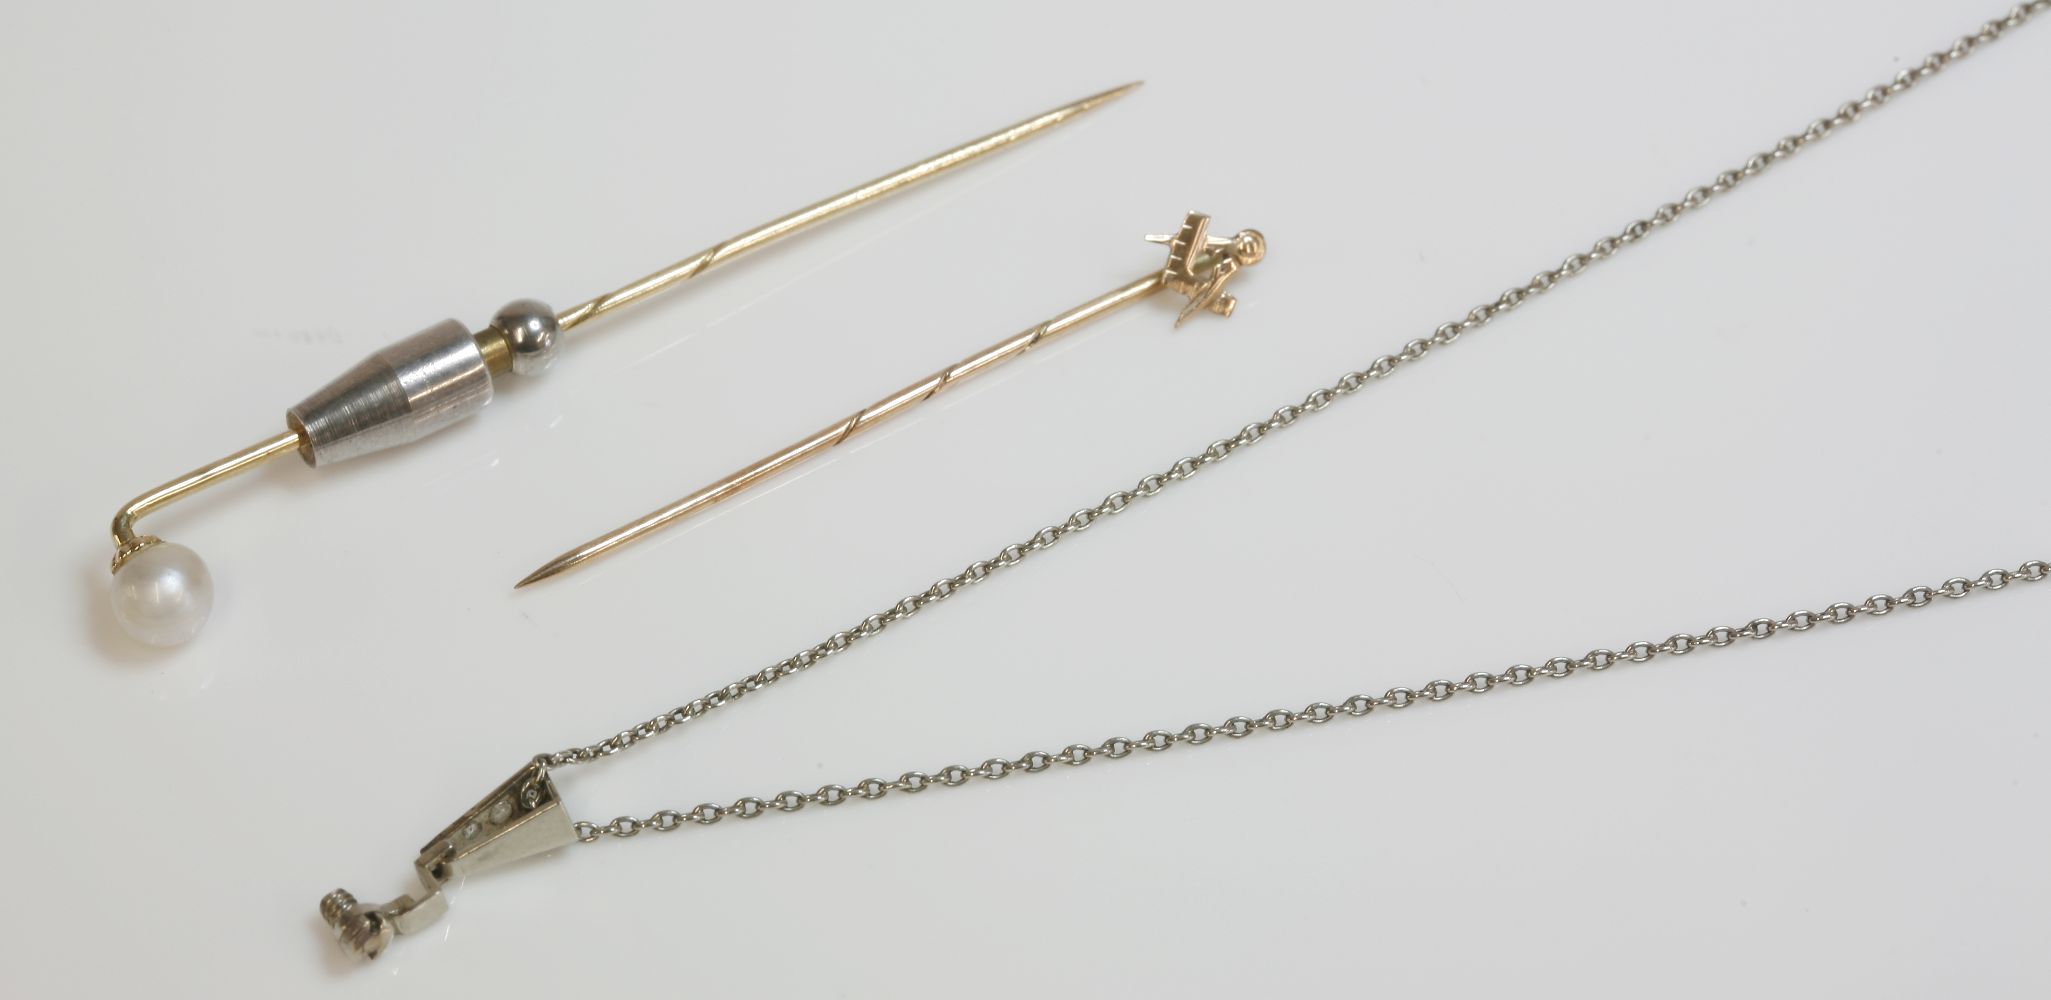 A gold stick pin, mounted with a pearl, pearl untested, another gold Masonic stick pin, and a